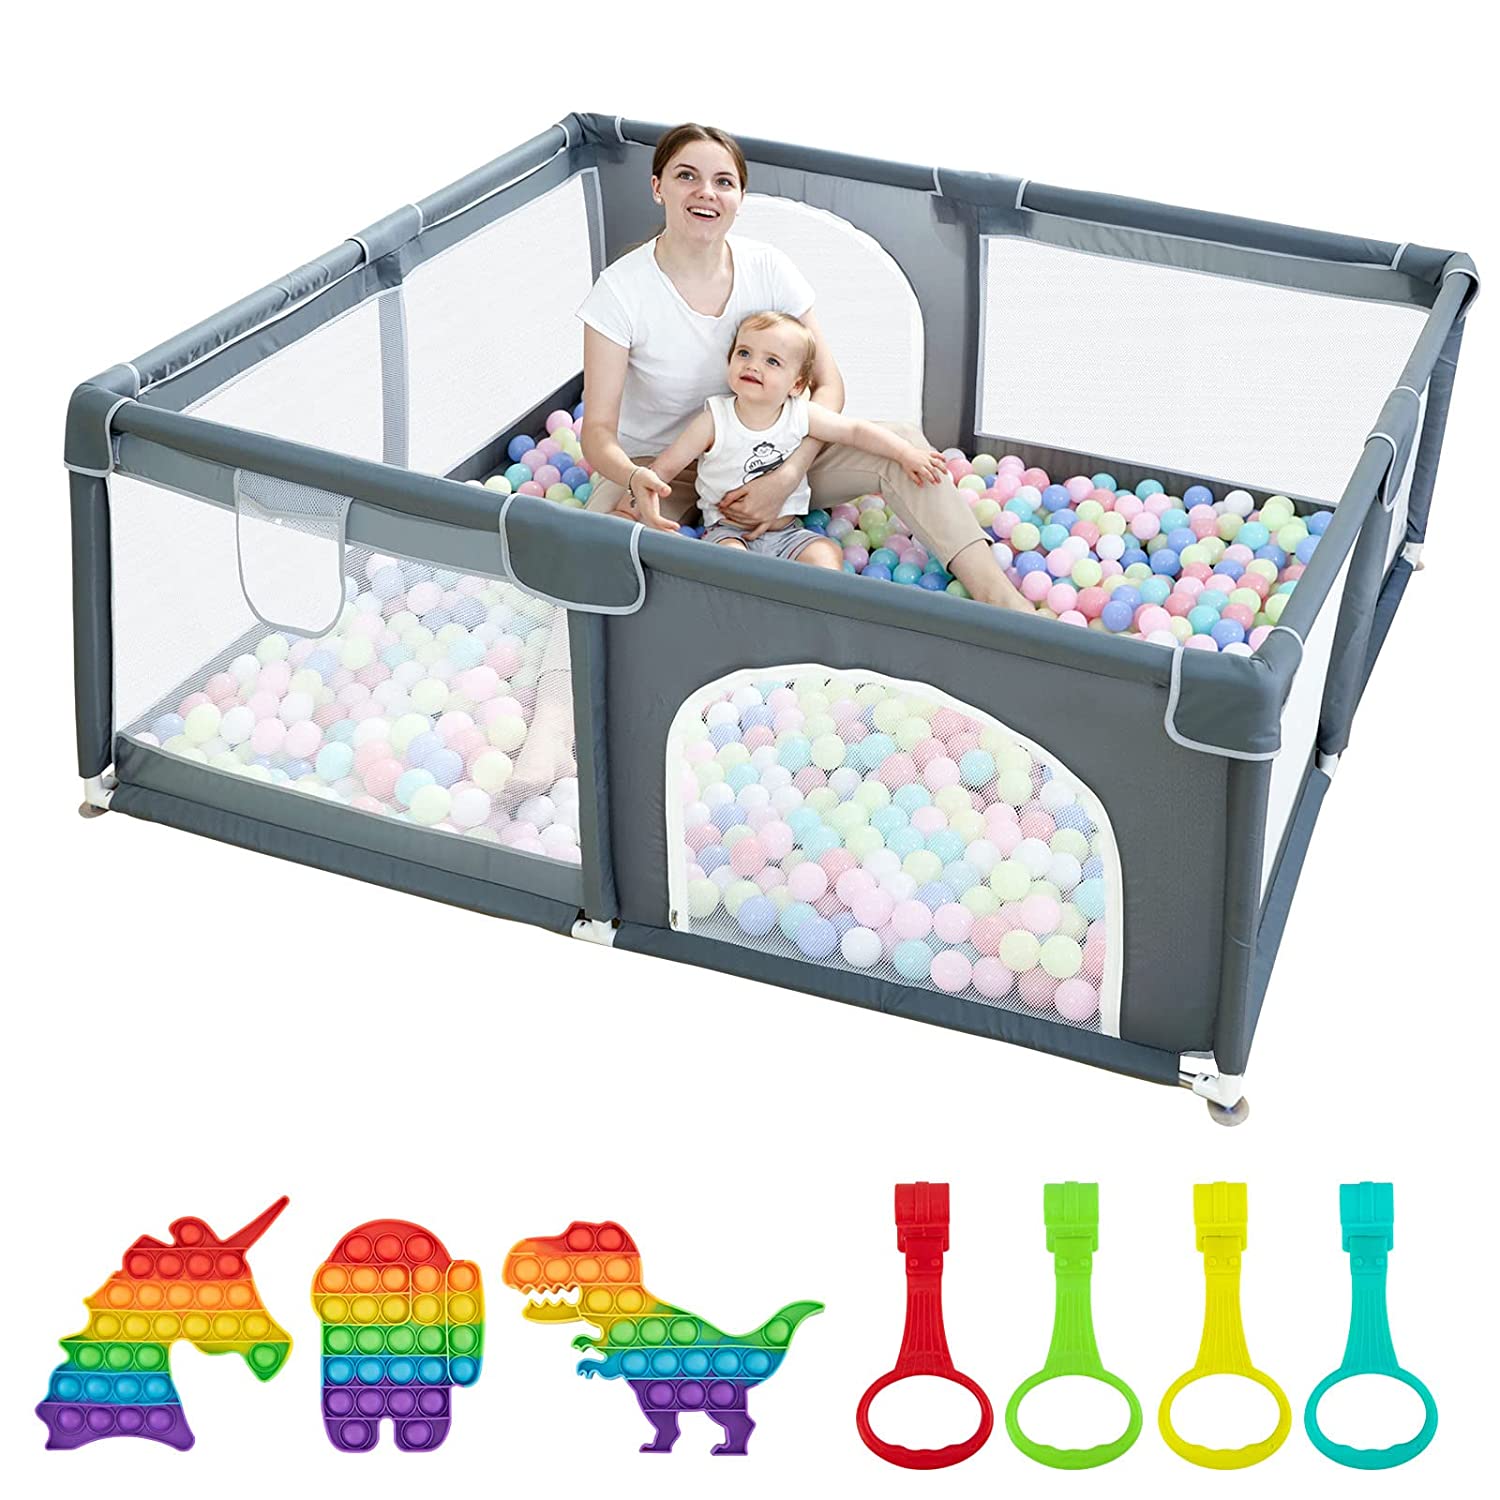 Large Baby Playpen79x71, Extra Large Play Pen For Babies And Toddlers, Play Yard With Gate, Baby Fence With Breathable Mesh, Safety Indoor & Outdoor Activity Center Grey - TryKid